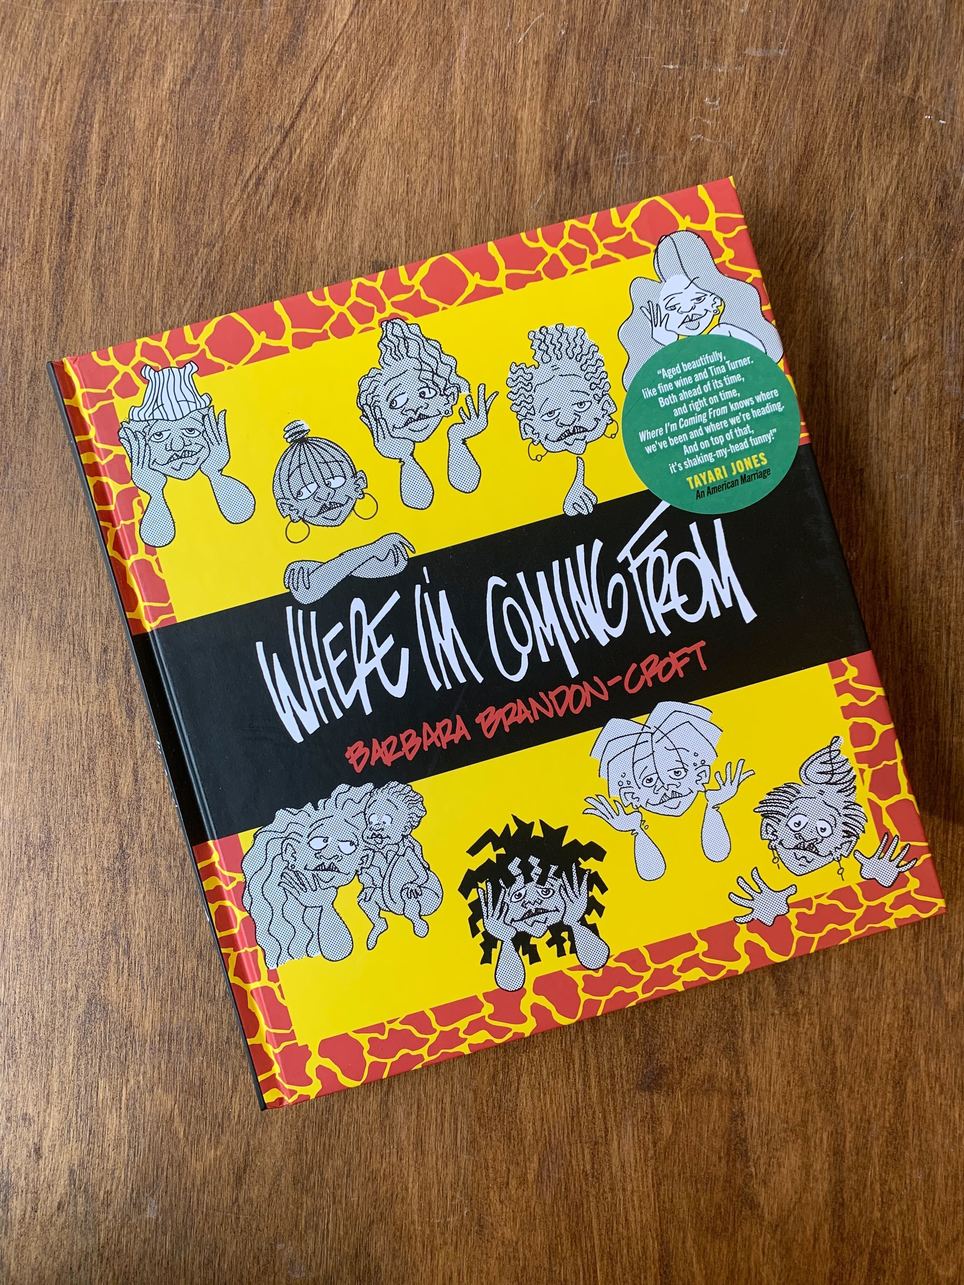 Leïka’s Review of Where I'm Coming From!